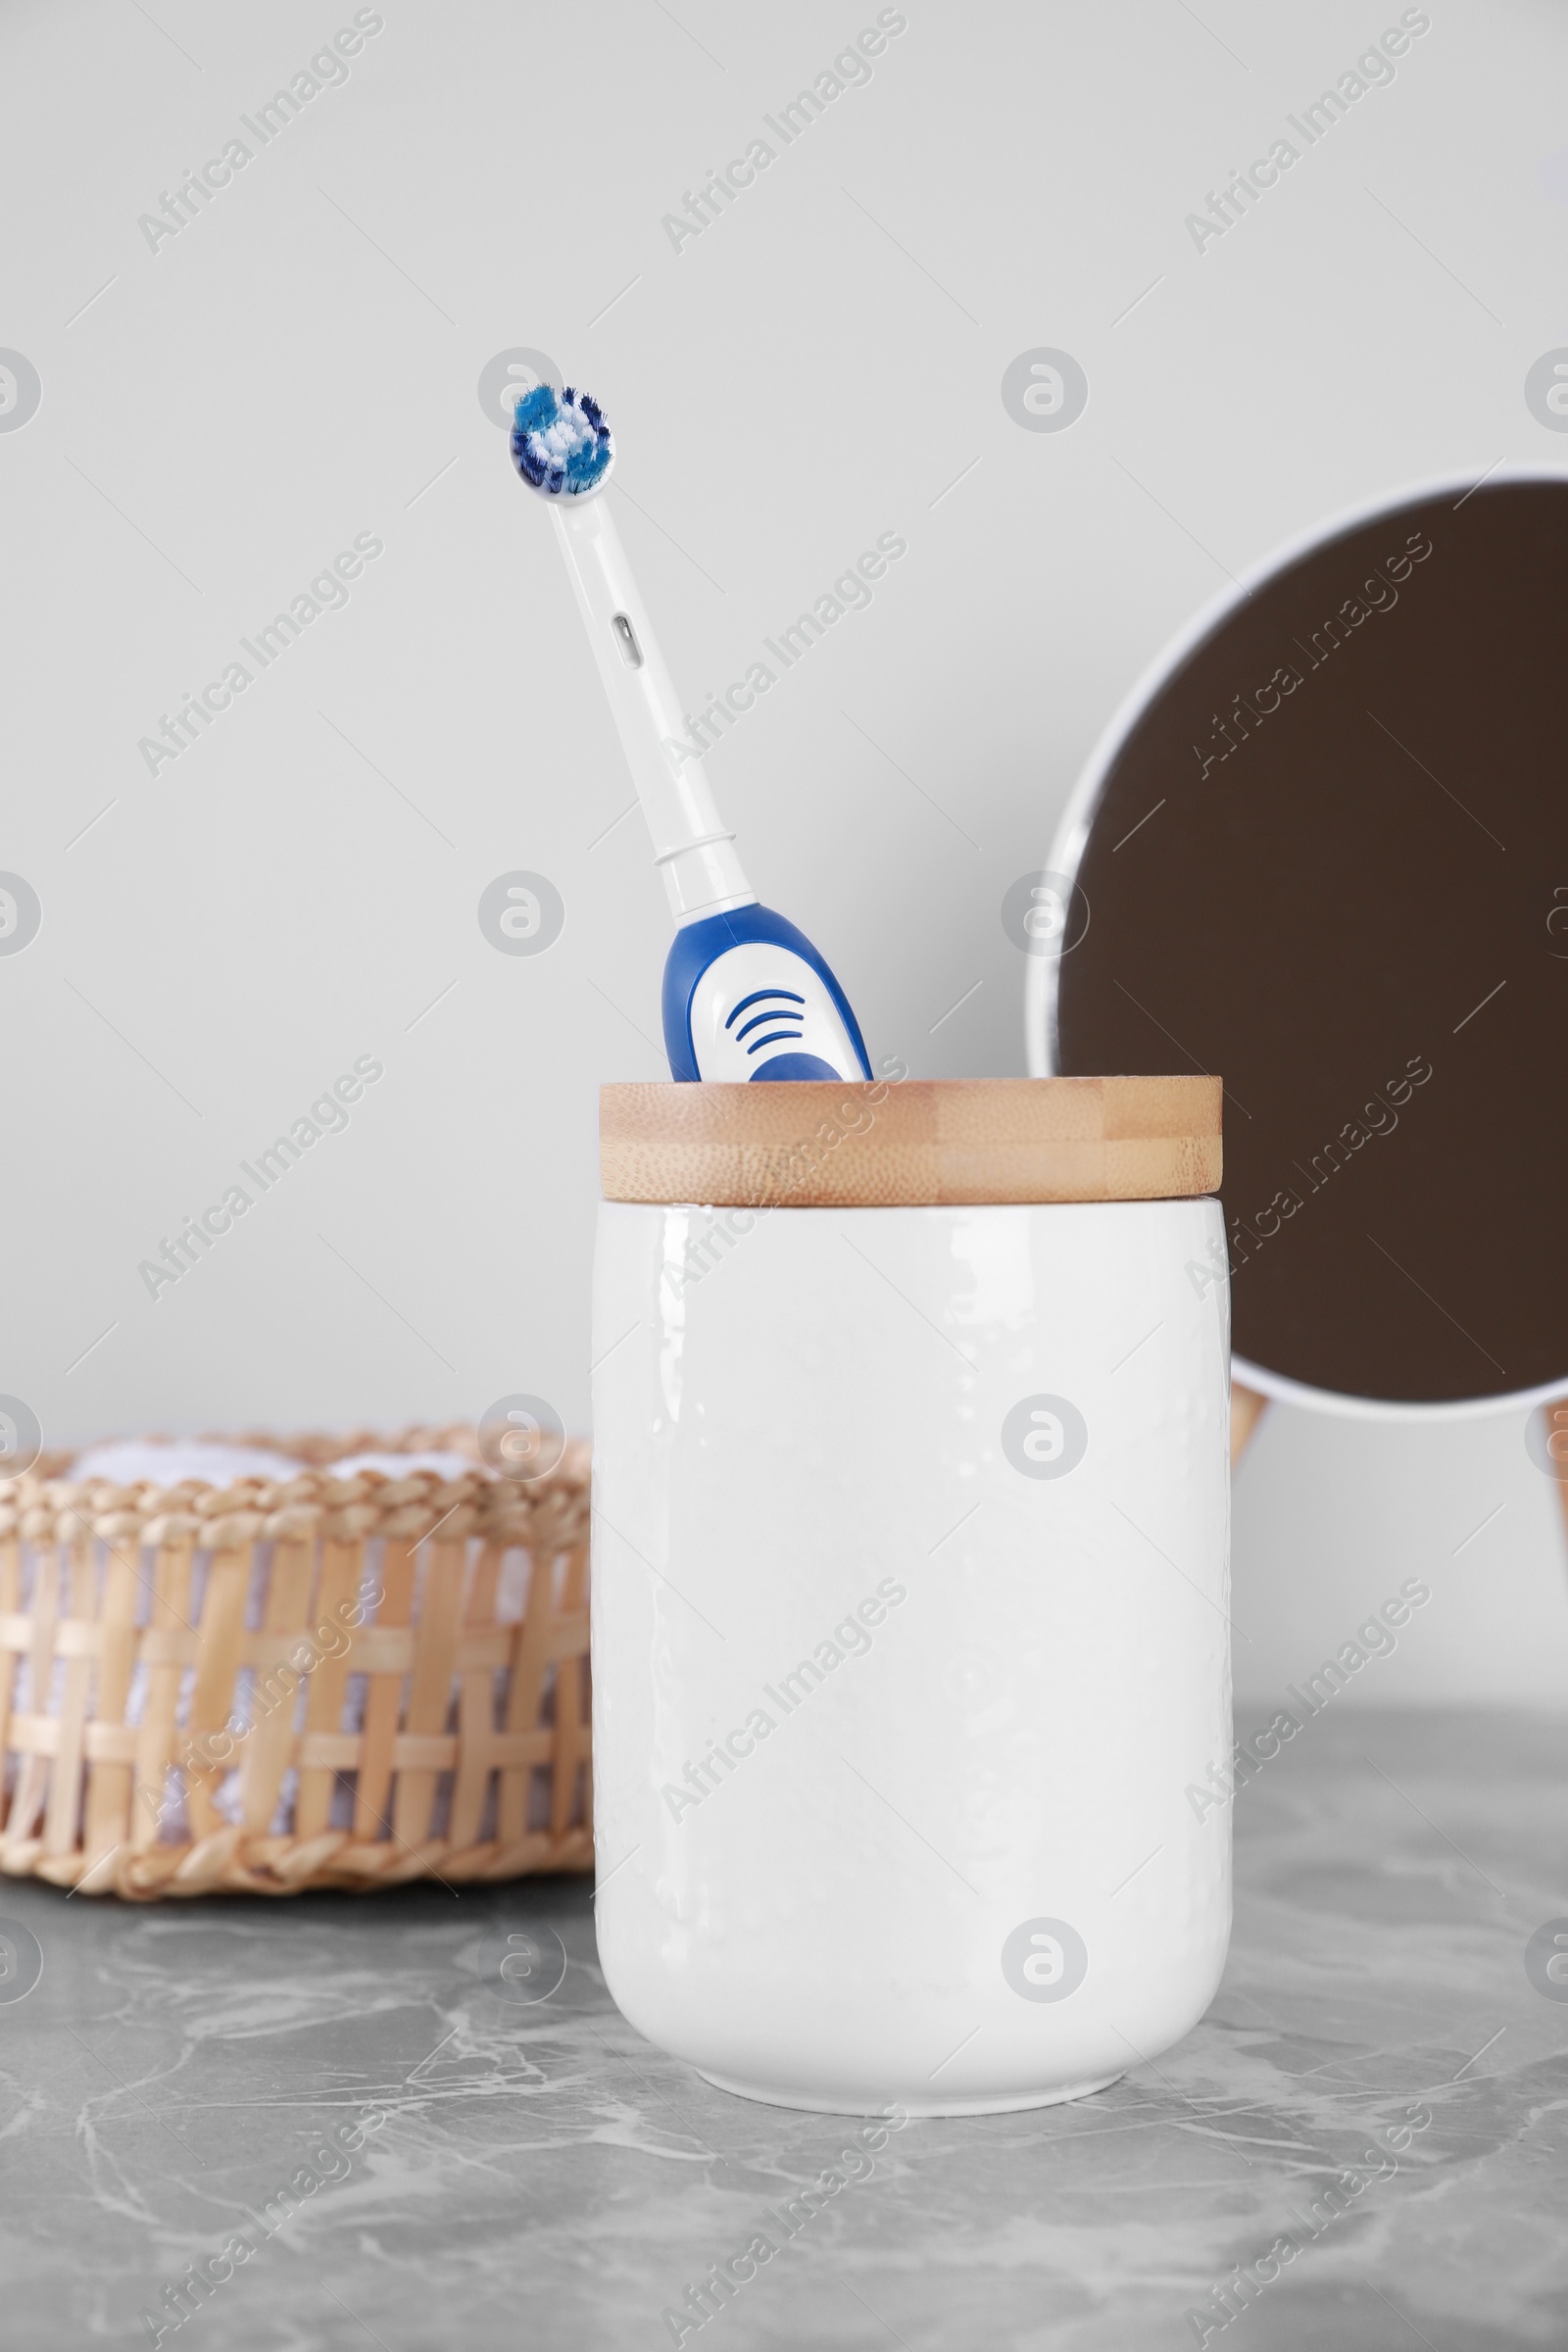 Photo of Electric toothbrush in holder, mirror and towel on light grey marble table near white wall